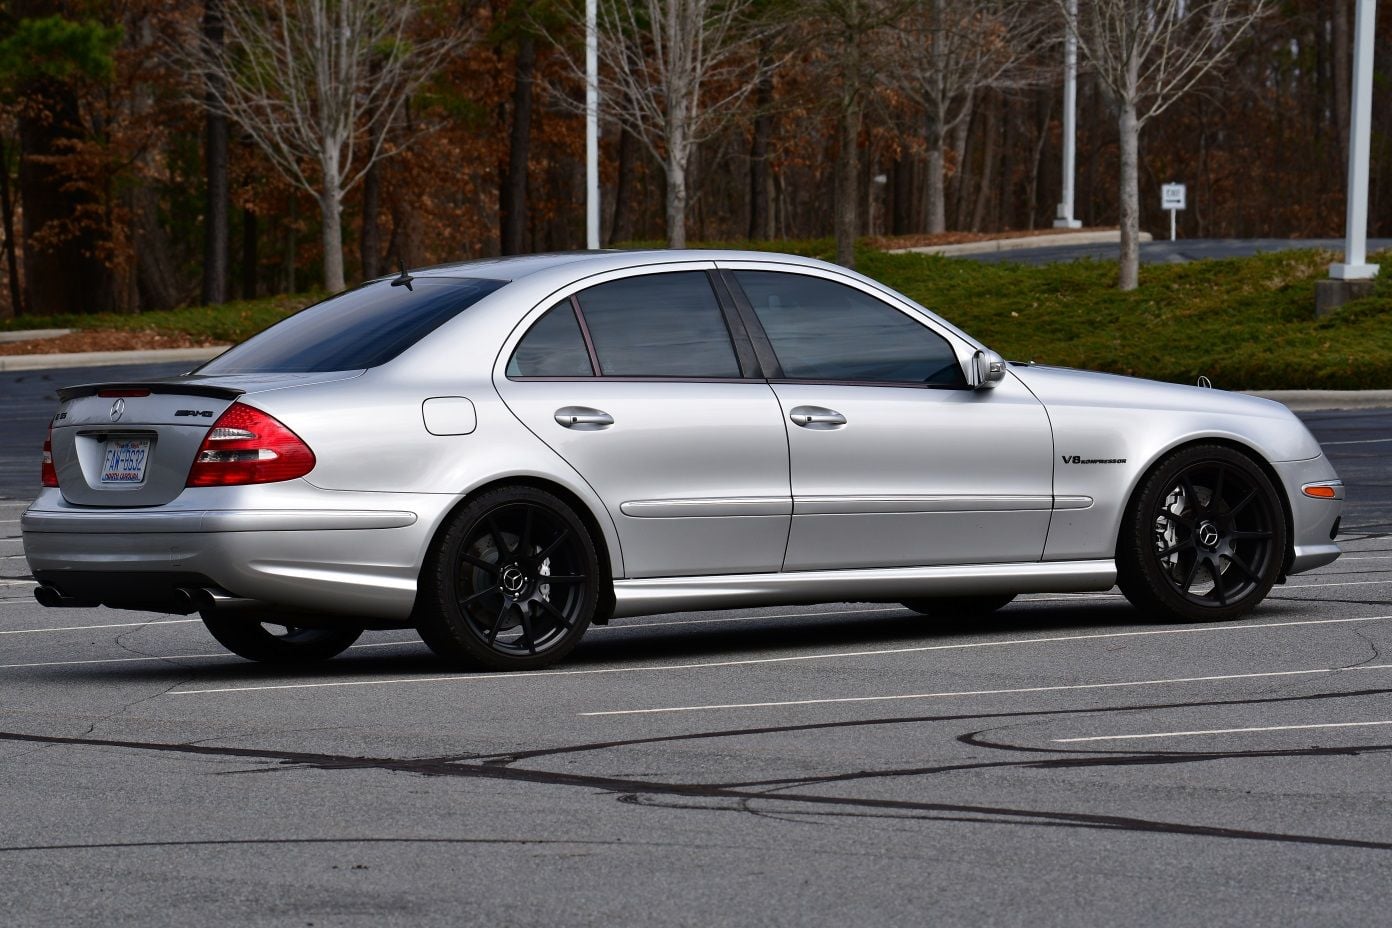 2004 Mercedes-Benz E55 AMG - 2004 AMG E55 - Adult Owned, Stock, Excellent Condition - Used - VIN WDBUF76J14A515080 - 95,000 Miles - 8 cyl - 2WD - Automatic - Sedan - Silver - Waxhaw, NC 28173, United States